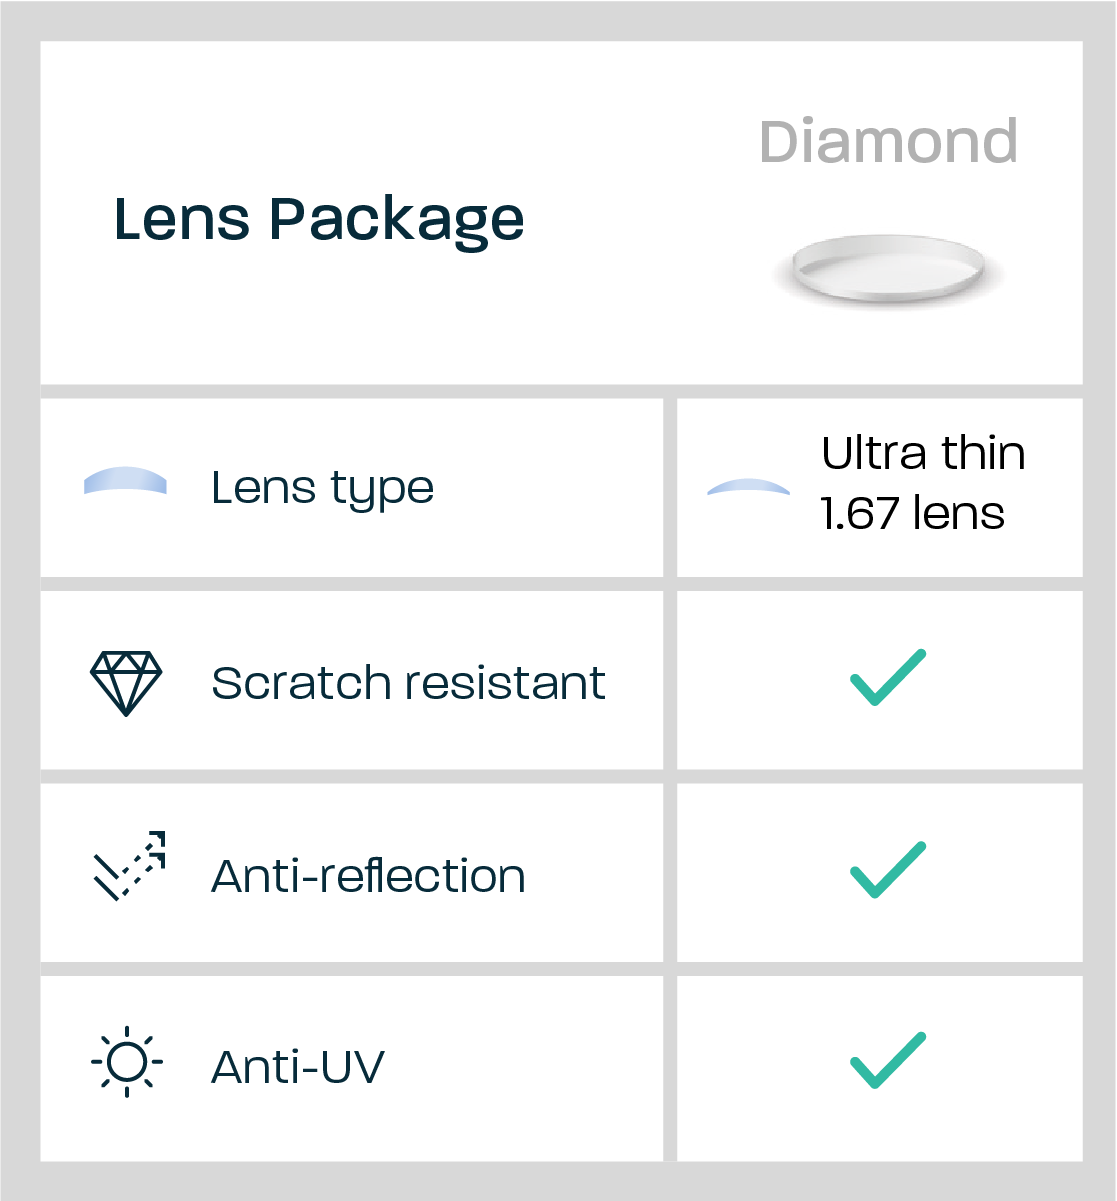 Diamond Package features: ultra thin lenses, scratch resistant, anti-reflection and anti-UV coatings